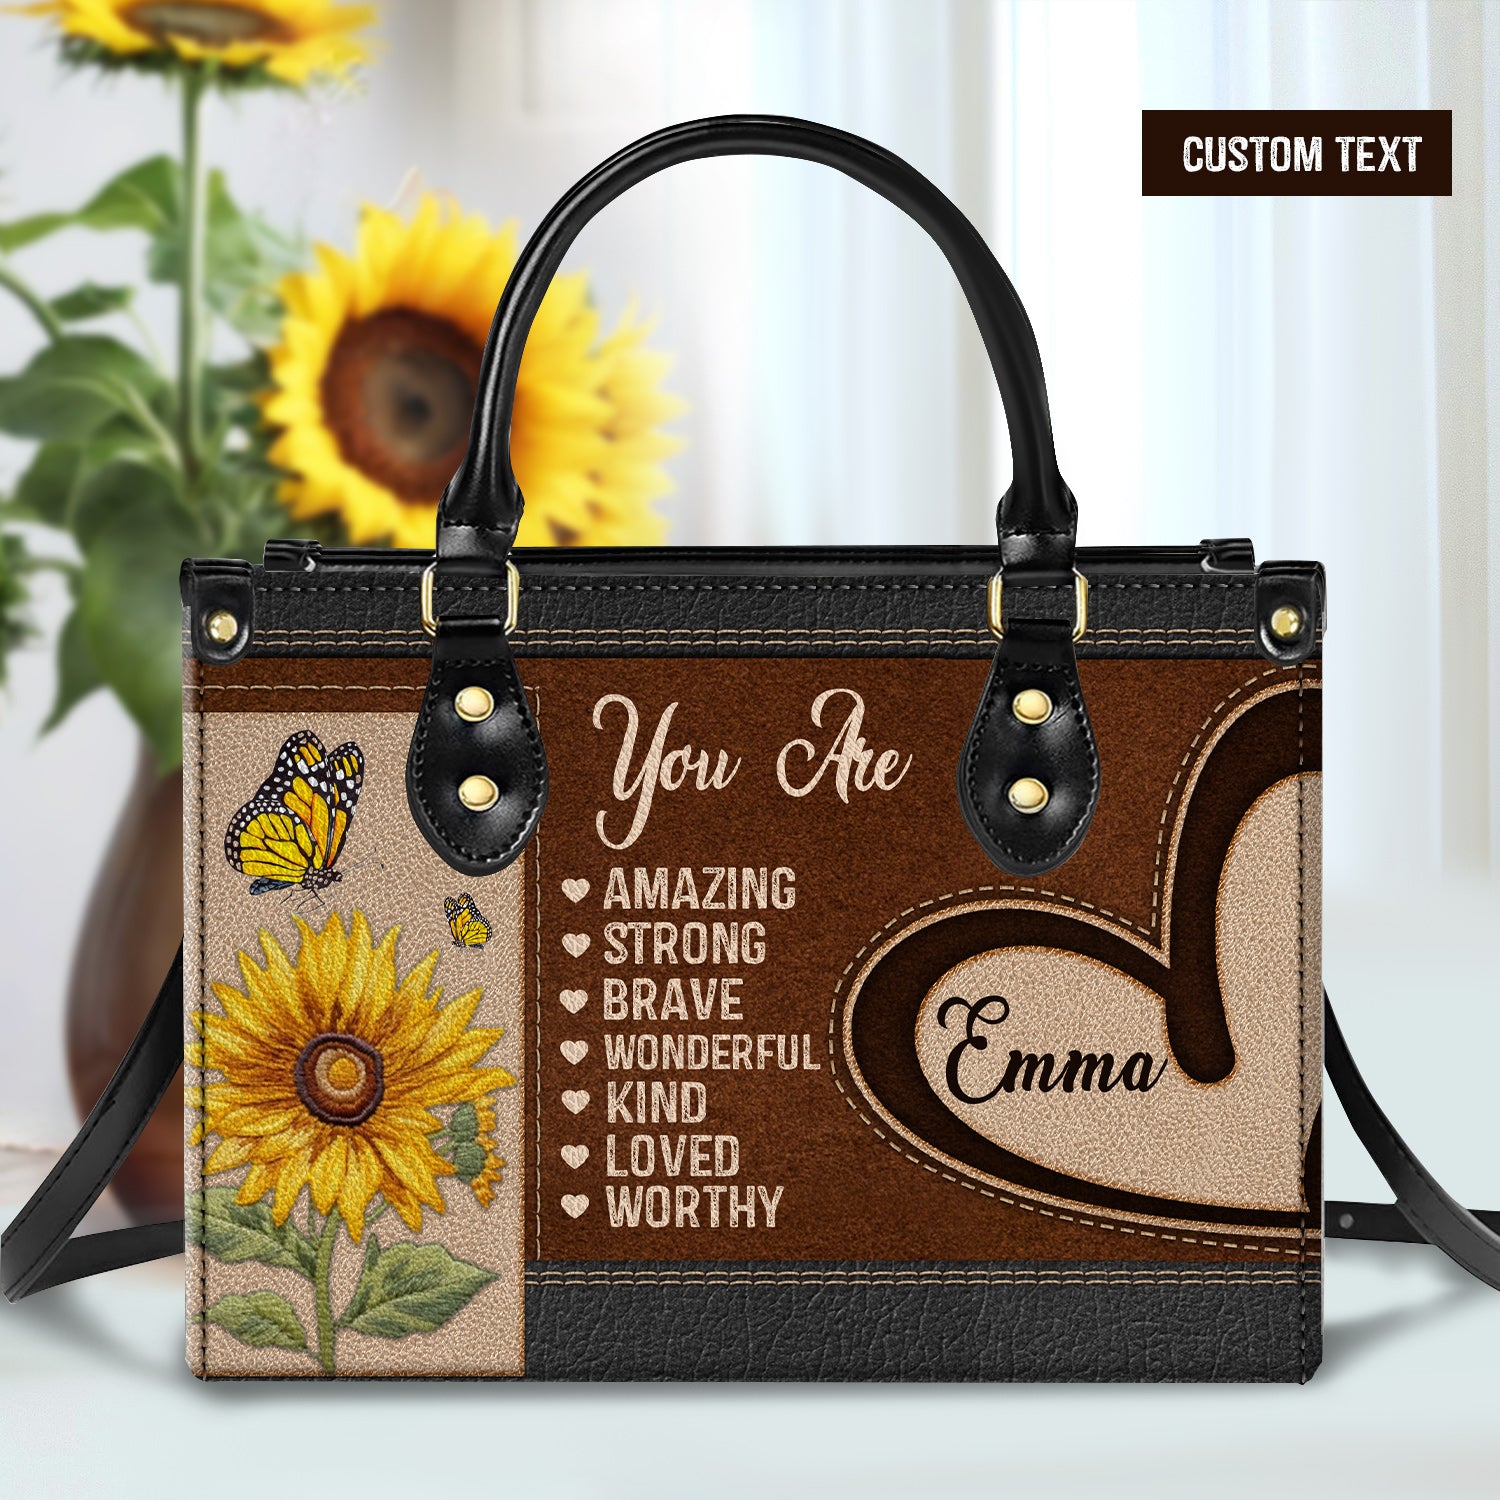 You Are Unique Vintage Style Personalized Leather Handbag